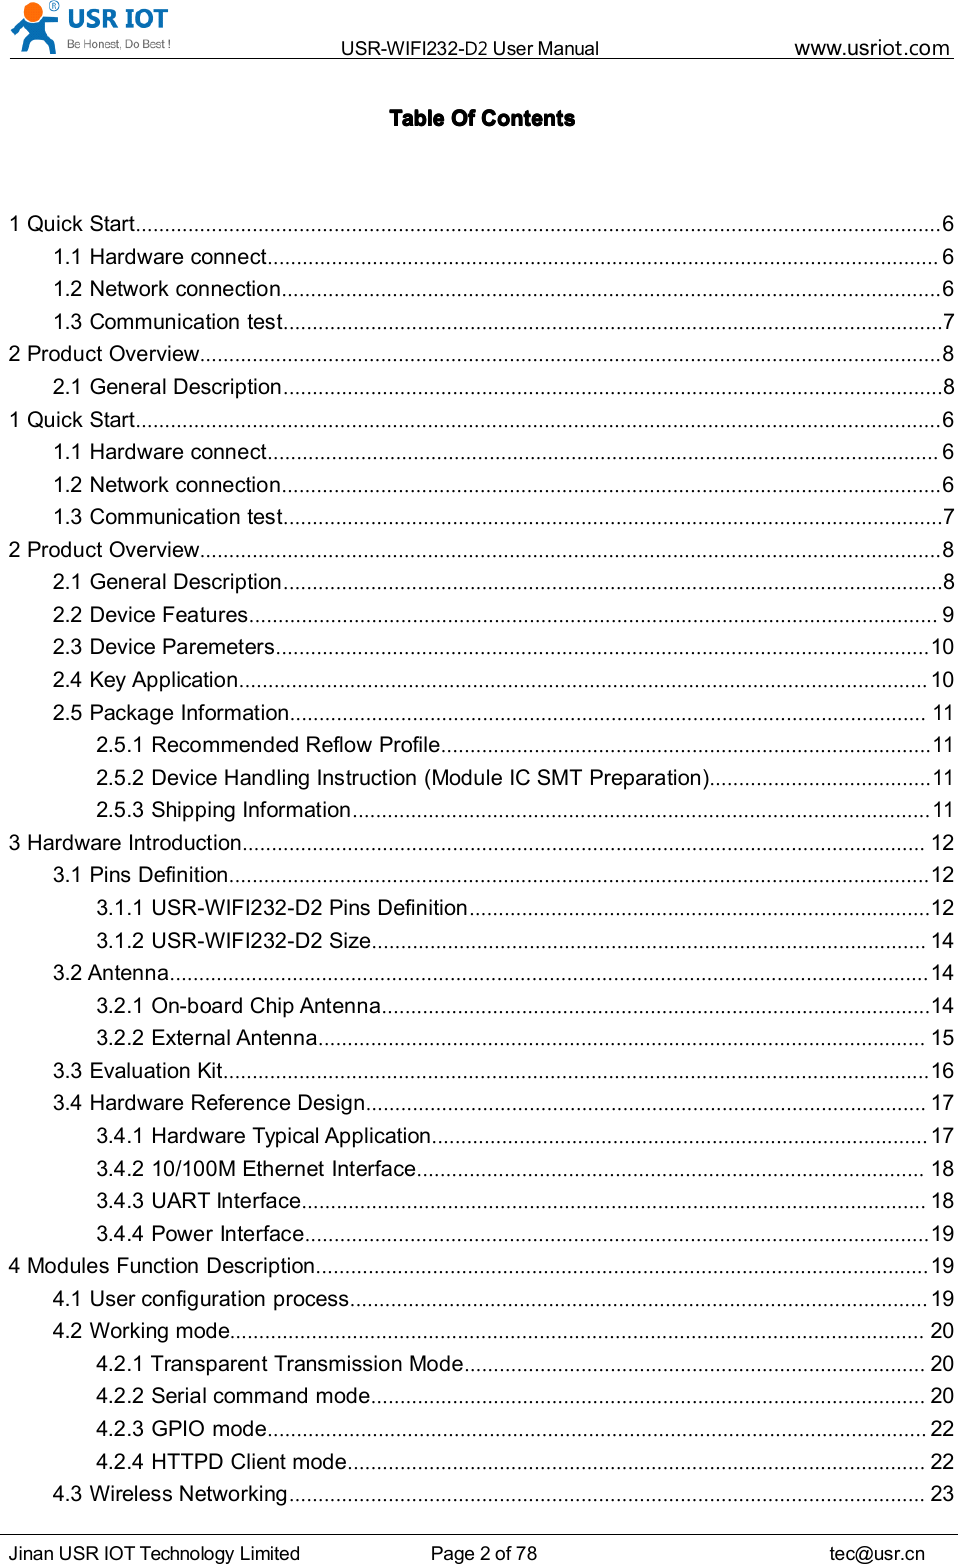 USR-WIFI232- D2 User Manual www.usr iot .comJinan USR IOT Technology Limited Page 2 of 78 tec@usr.cnTableTableTableTable OfOfOfOf ContentsContentsContentsContents1 Quick Start .......................................................................................................................................... 61.1 Hardware connect ................................................................................................................... 61.2 Network connection ................................................................................................................. 61.3 C ommunication test ................................................................................................................. 72 Product Overview ............................................................................................................................... 82.1 General Description ................................................................................................................. 81 Quick Start .......................................................................................................................................... 61.1 Hardware connect ................................................................................................................... 61.2 Network connection ................................................................................................................. 61.3 Communication test ................................................................................................................. 72 Product Overview ............................................................................................................................... 82.1 General Description ................................................................................................................. 82.2 Device Features ...................................................................................................................... 92.3 Device Paremeters ................................................................................................................ 102.4 Key Application ...................................................................................................................... 102.5 Package Information .............................................................................................................112.5.1 Recommended Reflow Profile ....................................................................................112.5.2 Device Handling Instruction (Module IC SMT Preparation) ......................................112.5.3 Shipping Information ...................................................................................................113 Hardware Introduction ..................................................................................................................... 123.1 Pins Definition ........................................................................................................................ 123.1.1 USR-WIFI232-D2 Pins Definition ............................................................................... 123.1.2 USR-WIFI232-D2 Size ............................................................................................... 143.2 Antenna .................................................................................................................................. 143.2.1 On-board Chip Antenna .............................................................................................. 143.2.2 External Antenna ........................................................................................................ 153.3 Evaluation Kit ......................................................................................................................... 163.4 Hardware Reference Design ................................................................................................ 173.4.1 Hardware Typical Application ..................................................................................... 173.4.2 10/100M Ethernet Interface ....................................................................................... 183.4.3 UART Interface ........................................................................................................... 183.4.4 Power Interface ........................................................................................................... 194 Modules Function Description ......................................................................................................... 194.1 User configuration process ................................................................................................... 194.2 Working mode ....................................................................................................................... 204.2.1 Transparent Transmission Mode ............................................................................... 204.2.2 Serial command mode ............................................................................................... 204.2.3 GPIO mode ................................................................................................................. 224.2.4 HTTPD Client mode ................................................................................................... 224.3 Wireless Networking ............................................................................................................. 23